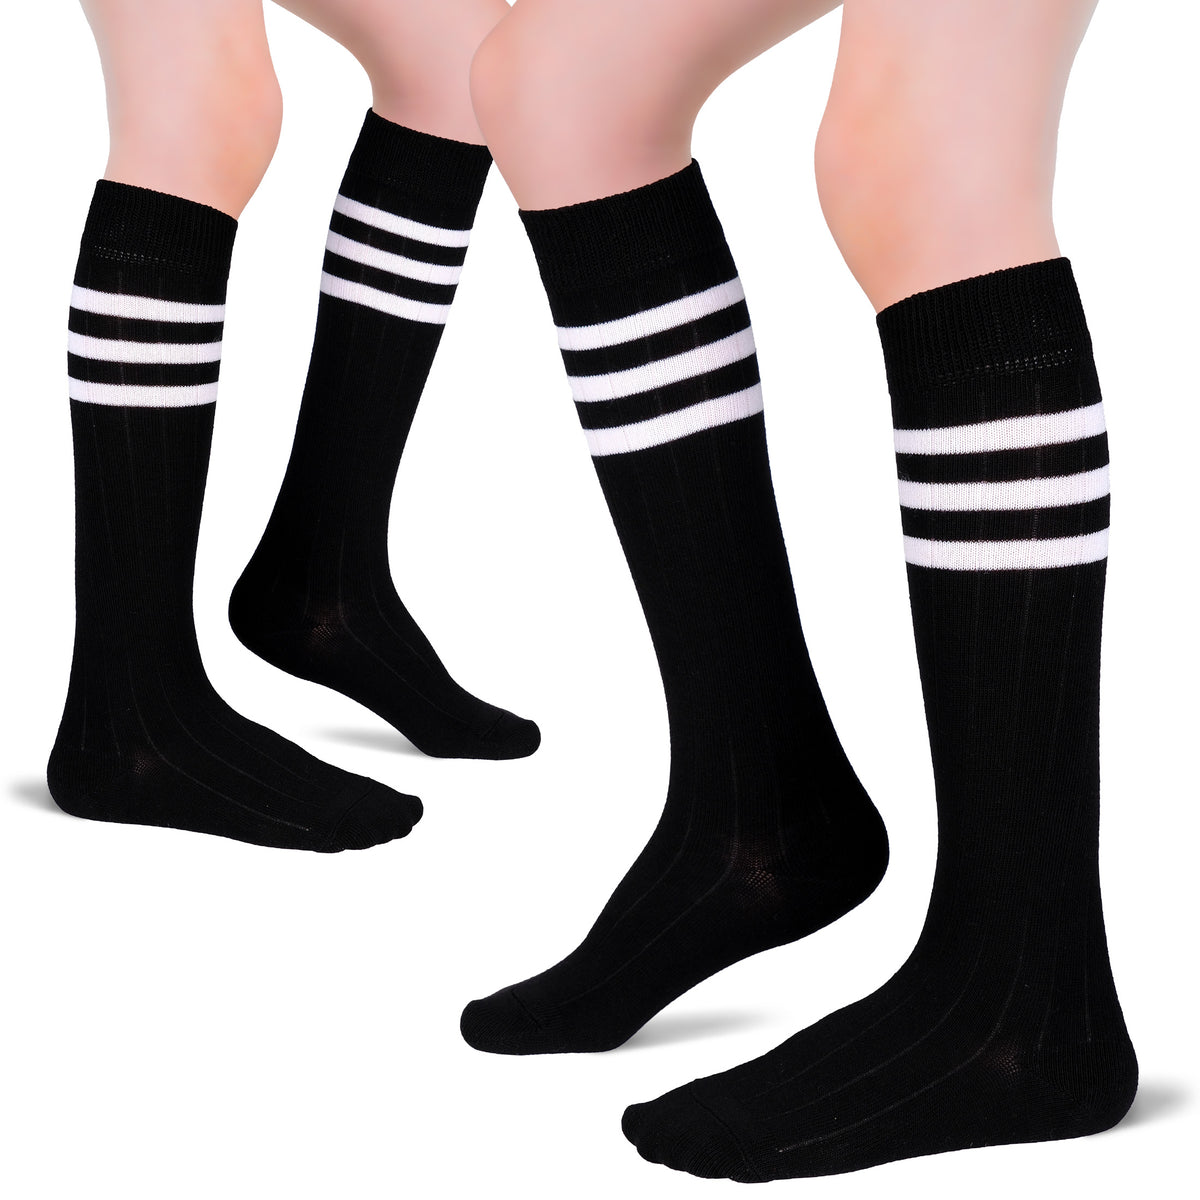 Get your hands on these Cotton Kids' Knee-High Socks that come in two pairs of black socks with white stripes. Ideal for both boys and girls.